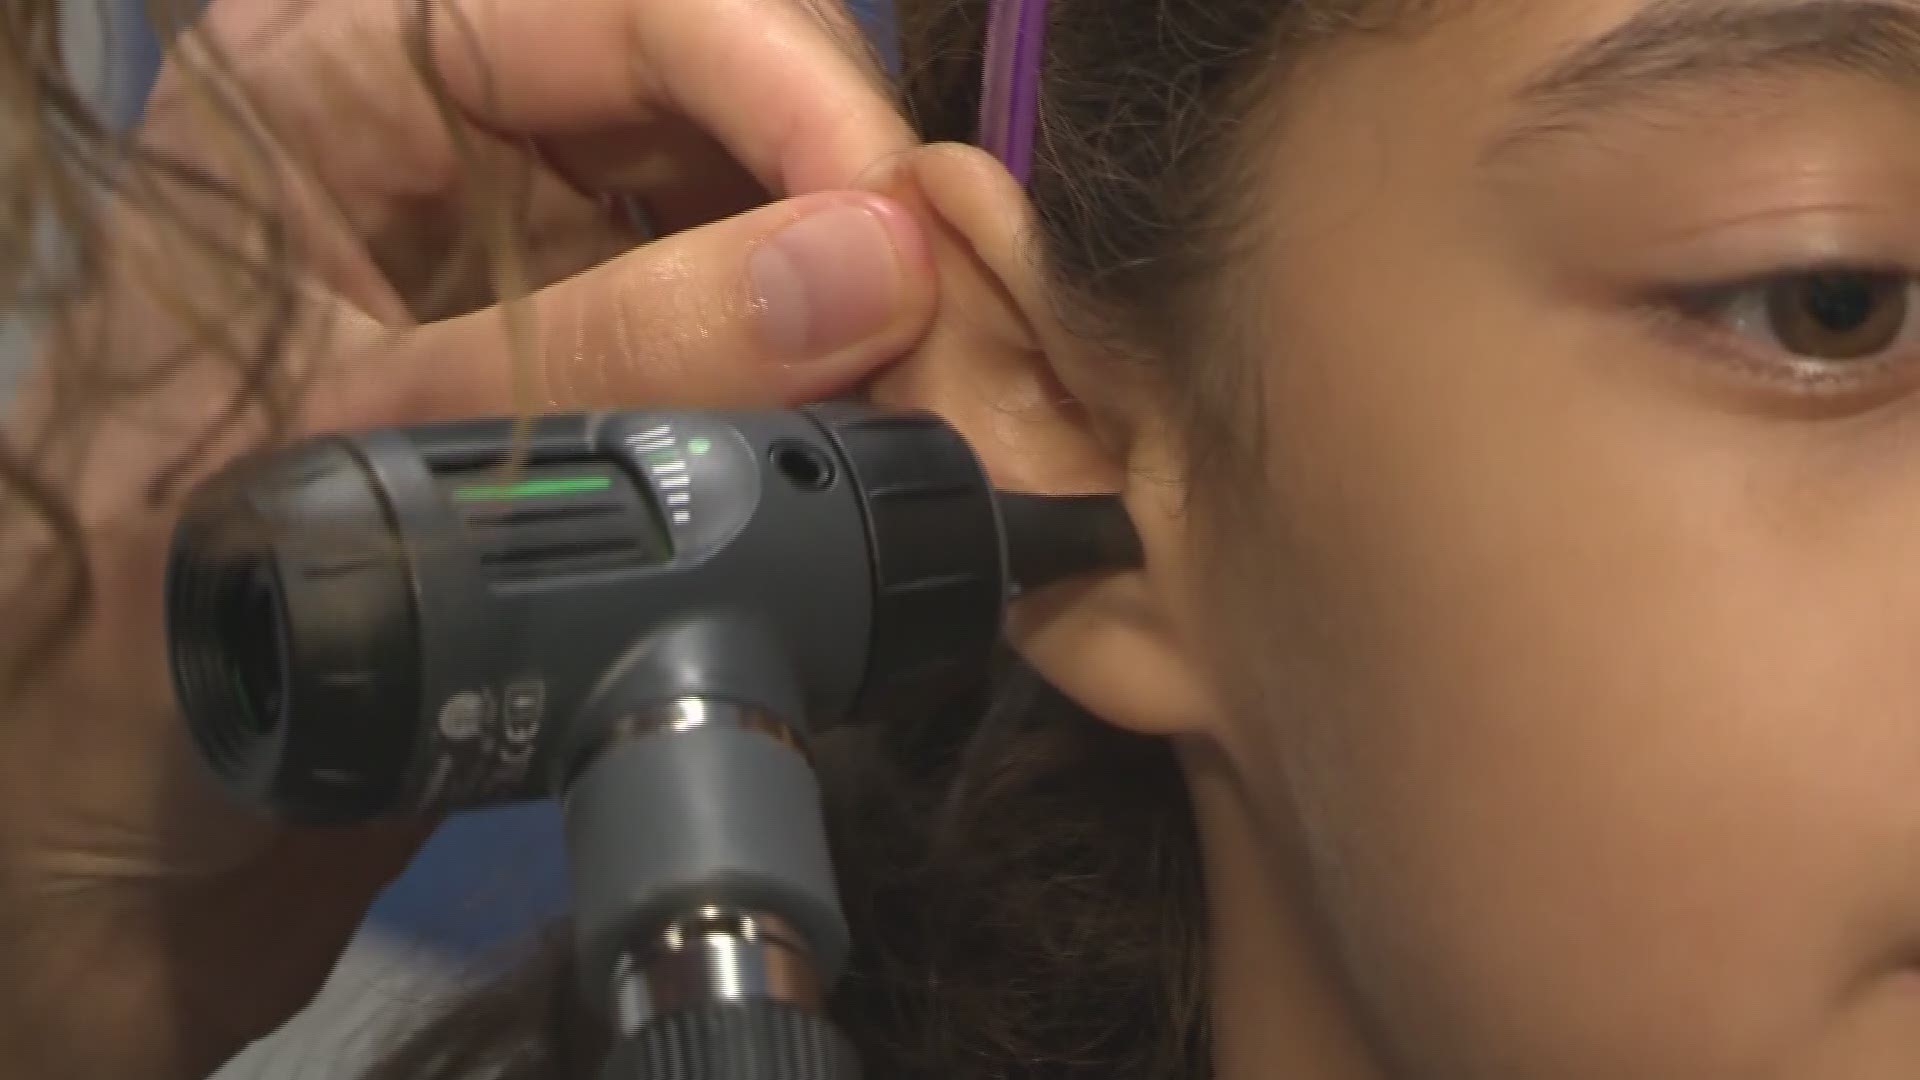 This tool can diagnose your child's ear infection without ever having to leave your home.